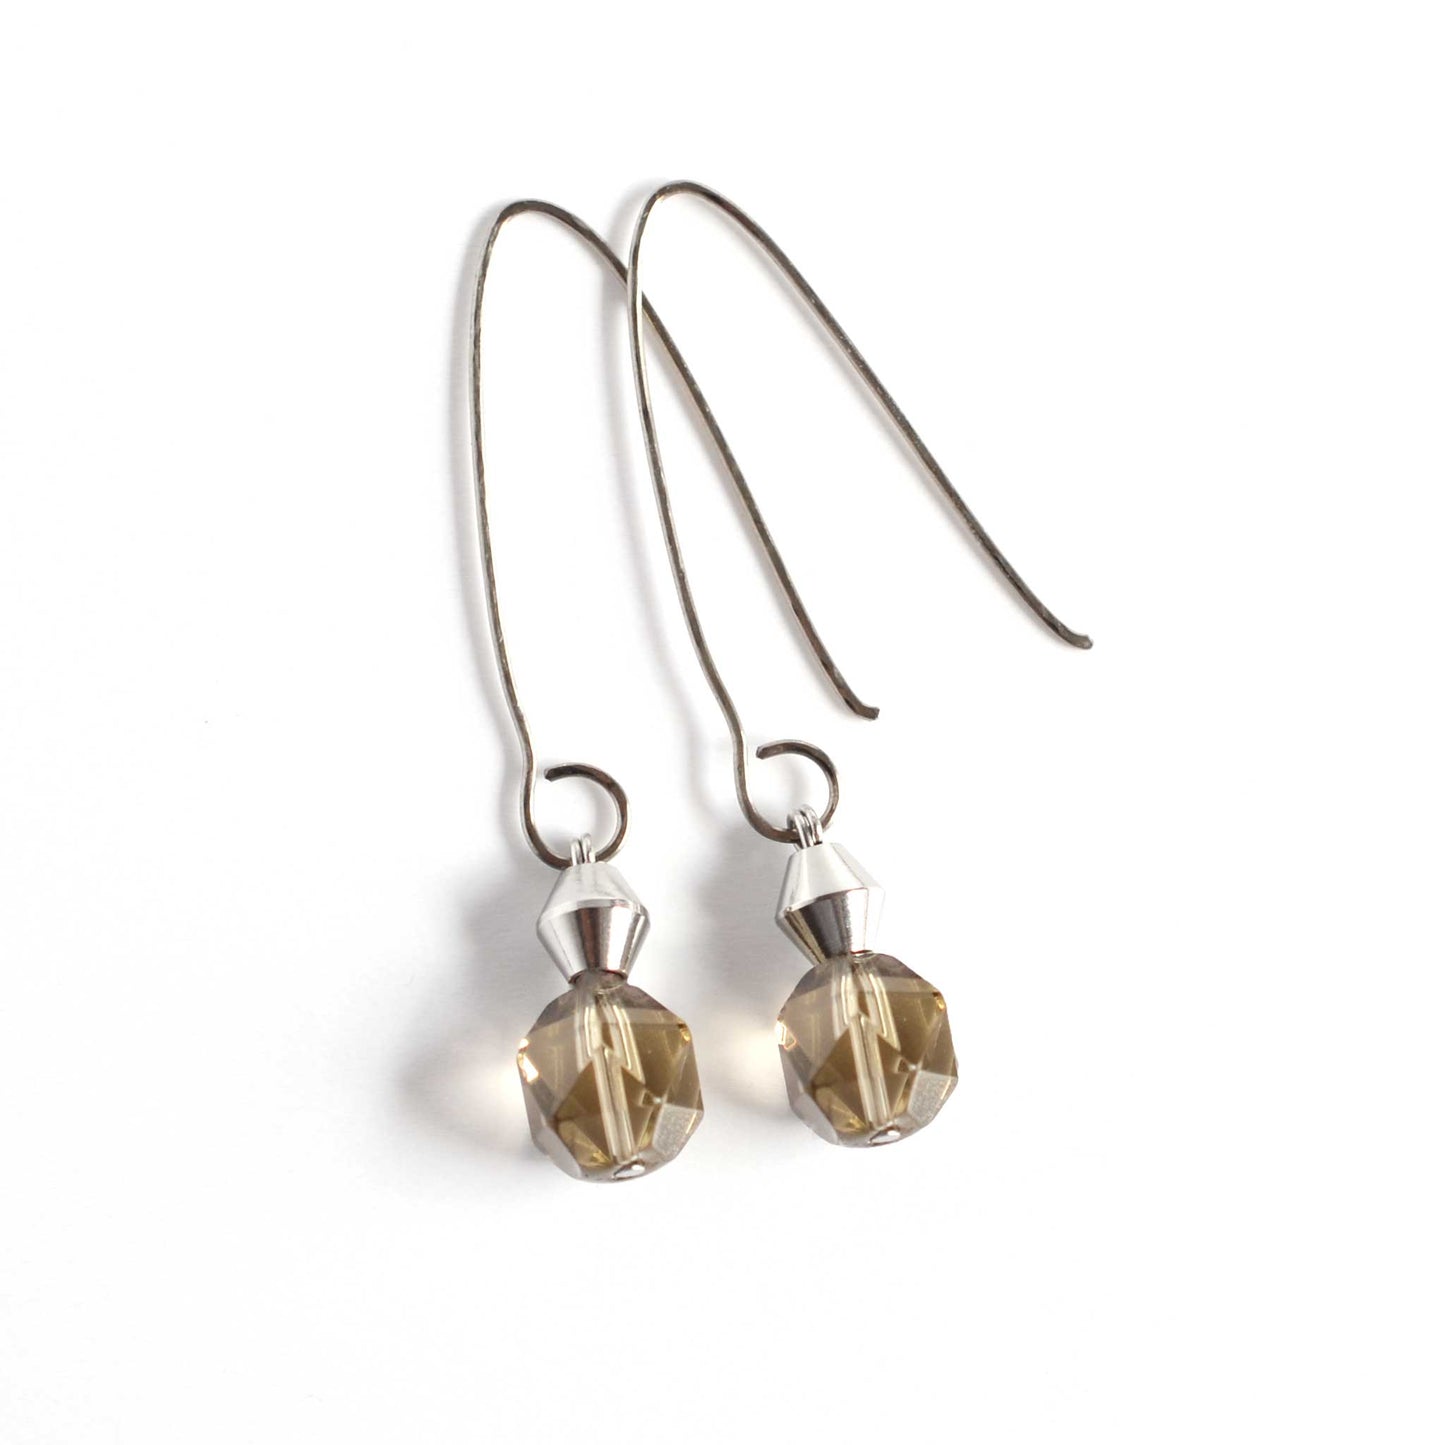 Smoky Quartz drop earrings with Titanium oval hooks laying on white background.